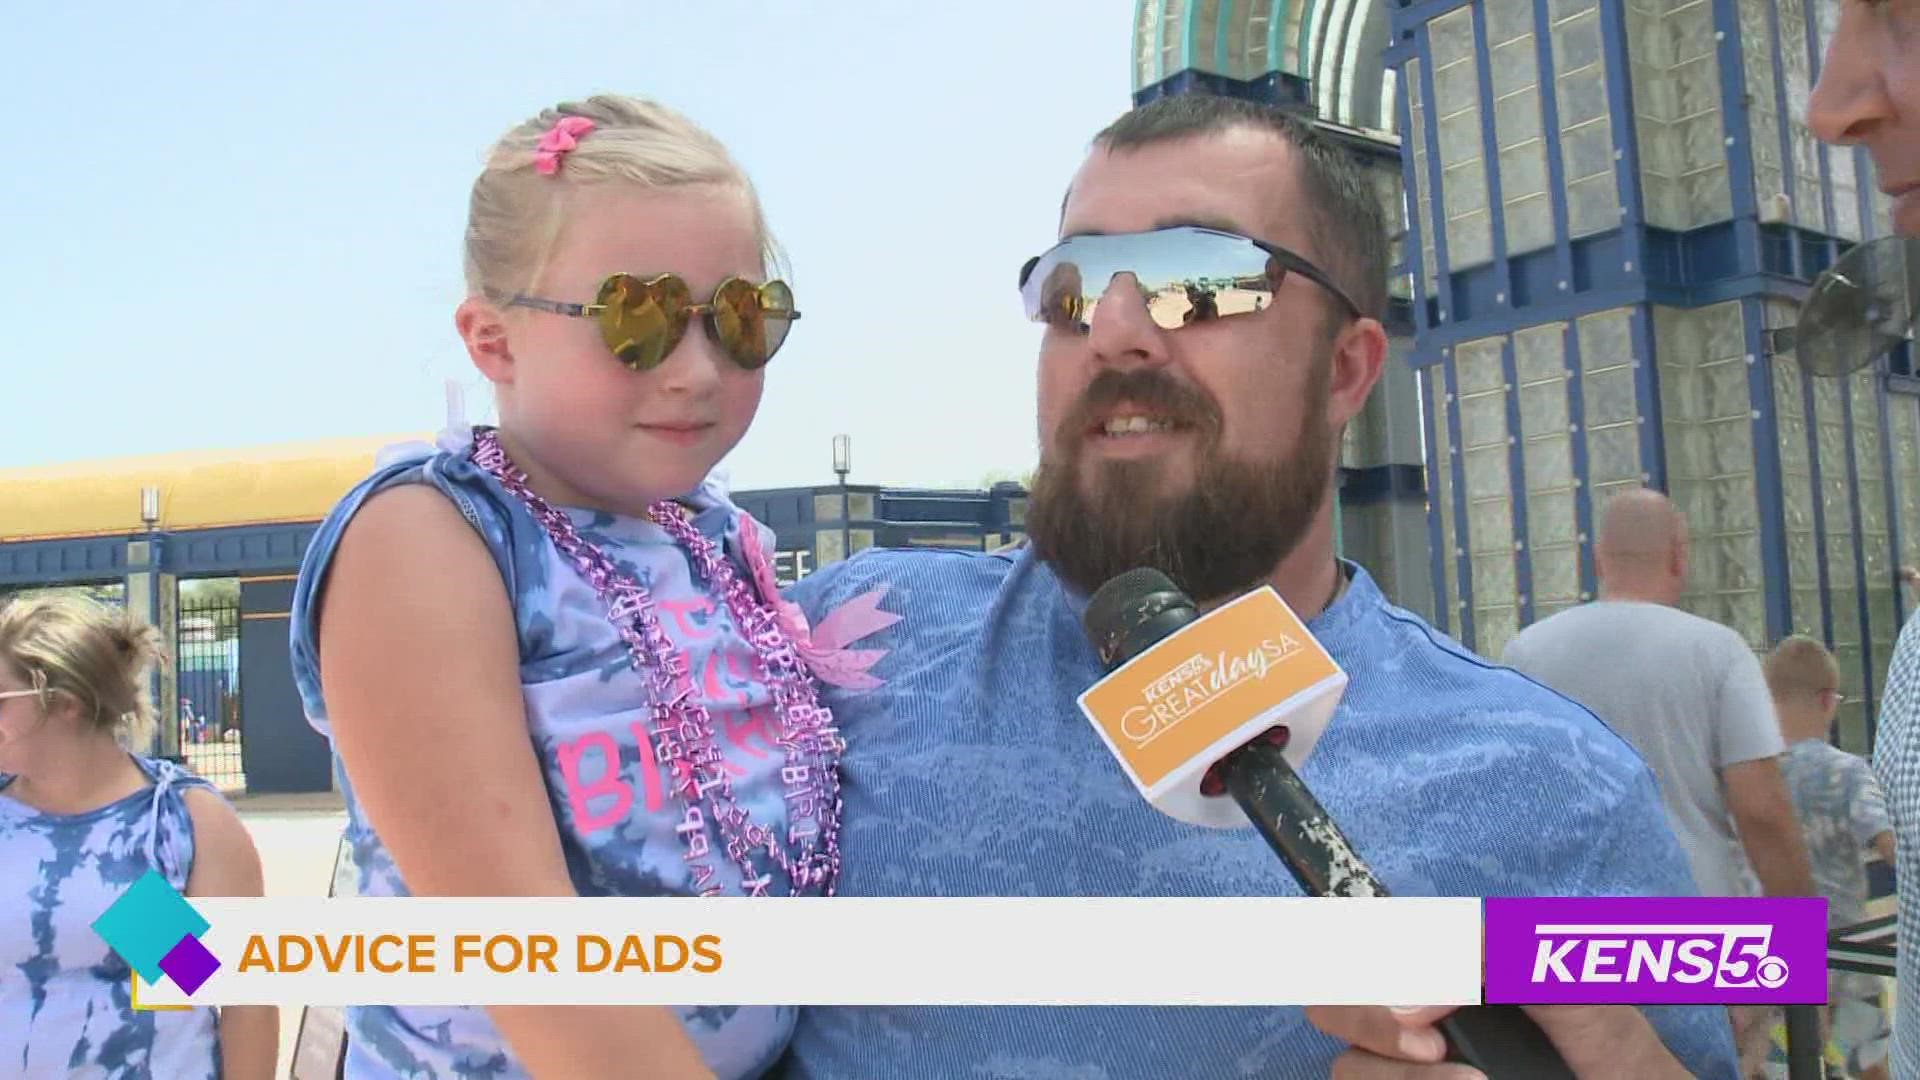 What some dad's had to say about being a father and advice they have for others